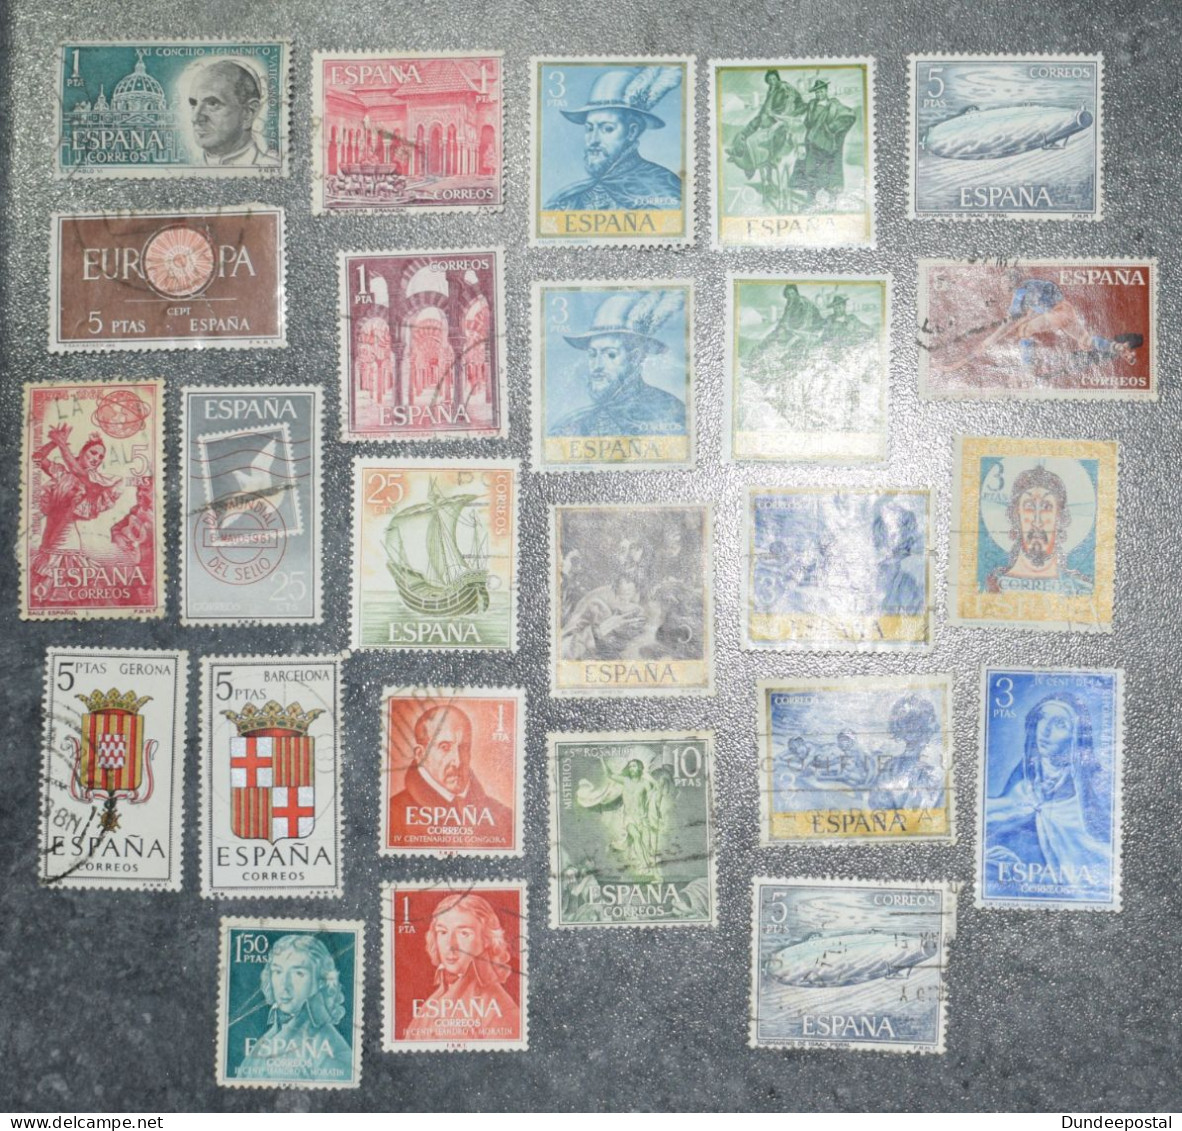 SPAIN  STAMPS Coms 1960 - 64  ~~L@@K~~ - Used Stamps